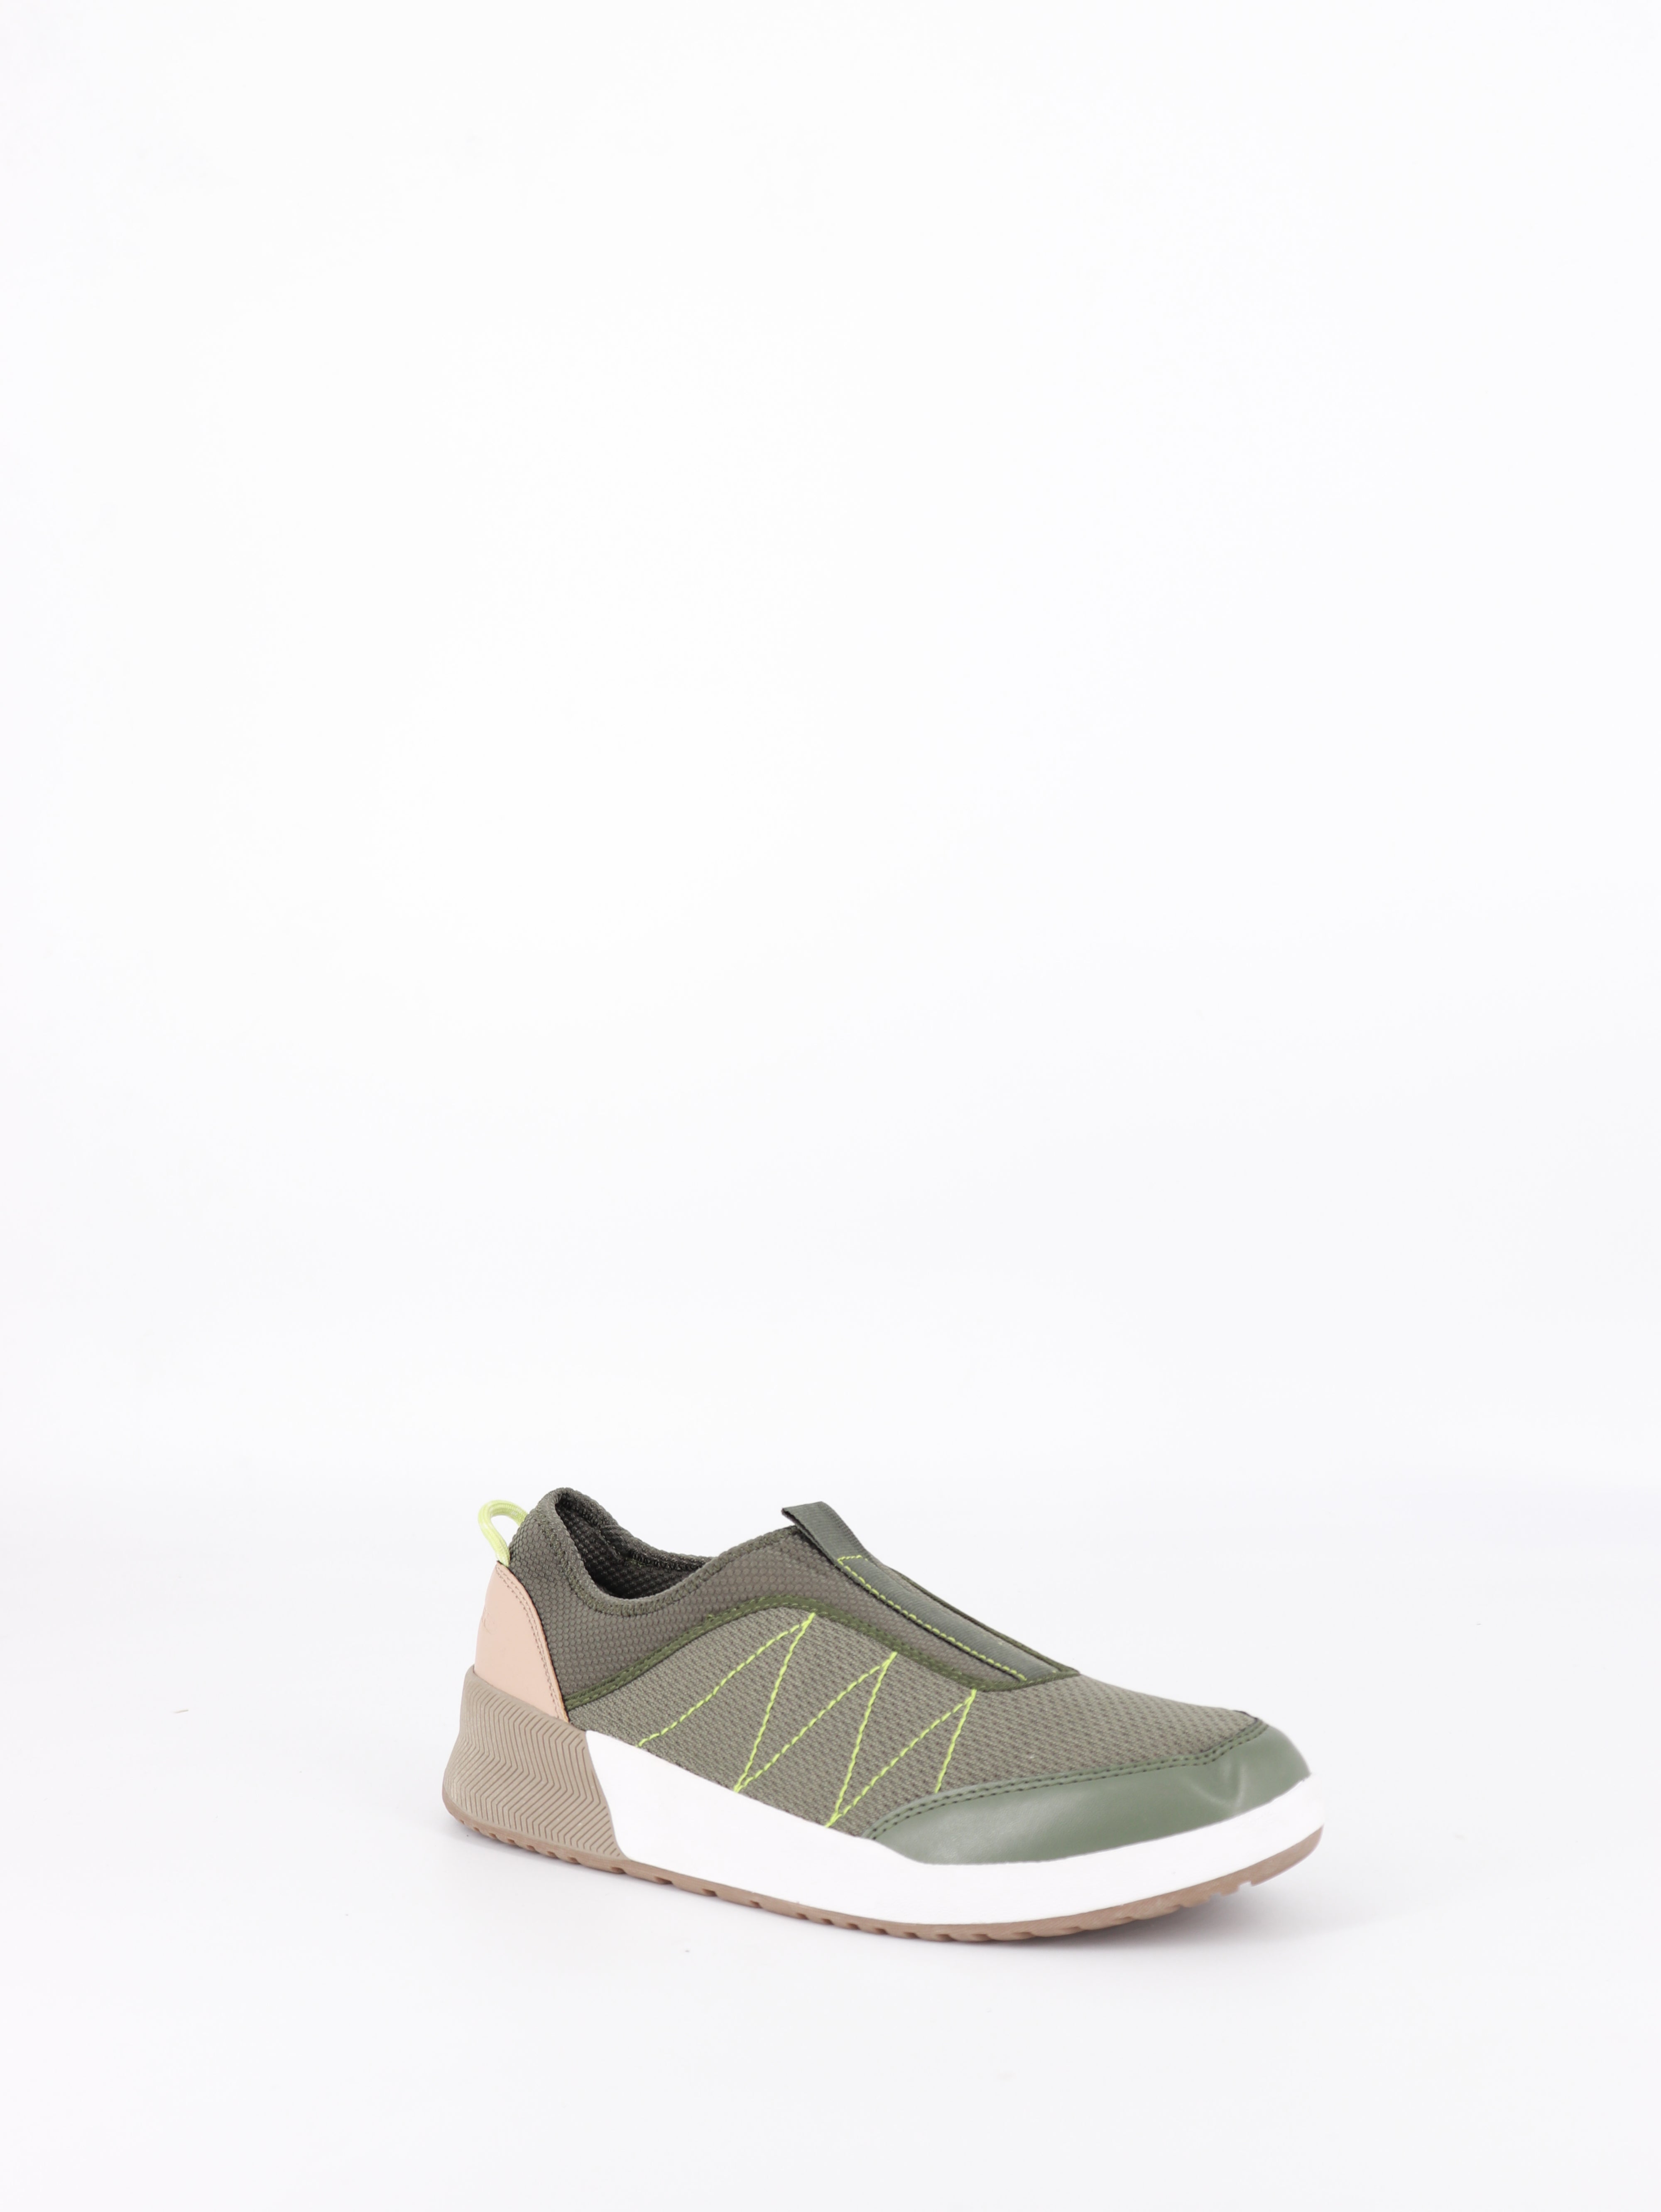 LANDS END Tenis Clasico Deportivo - Mujer - US 11